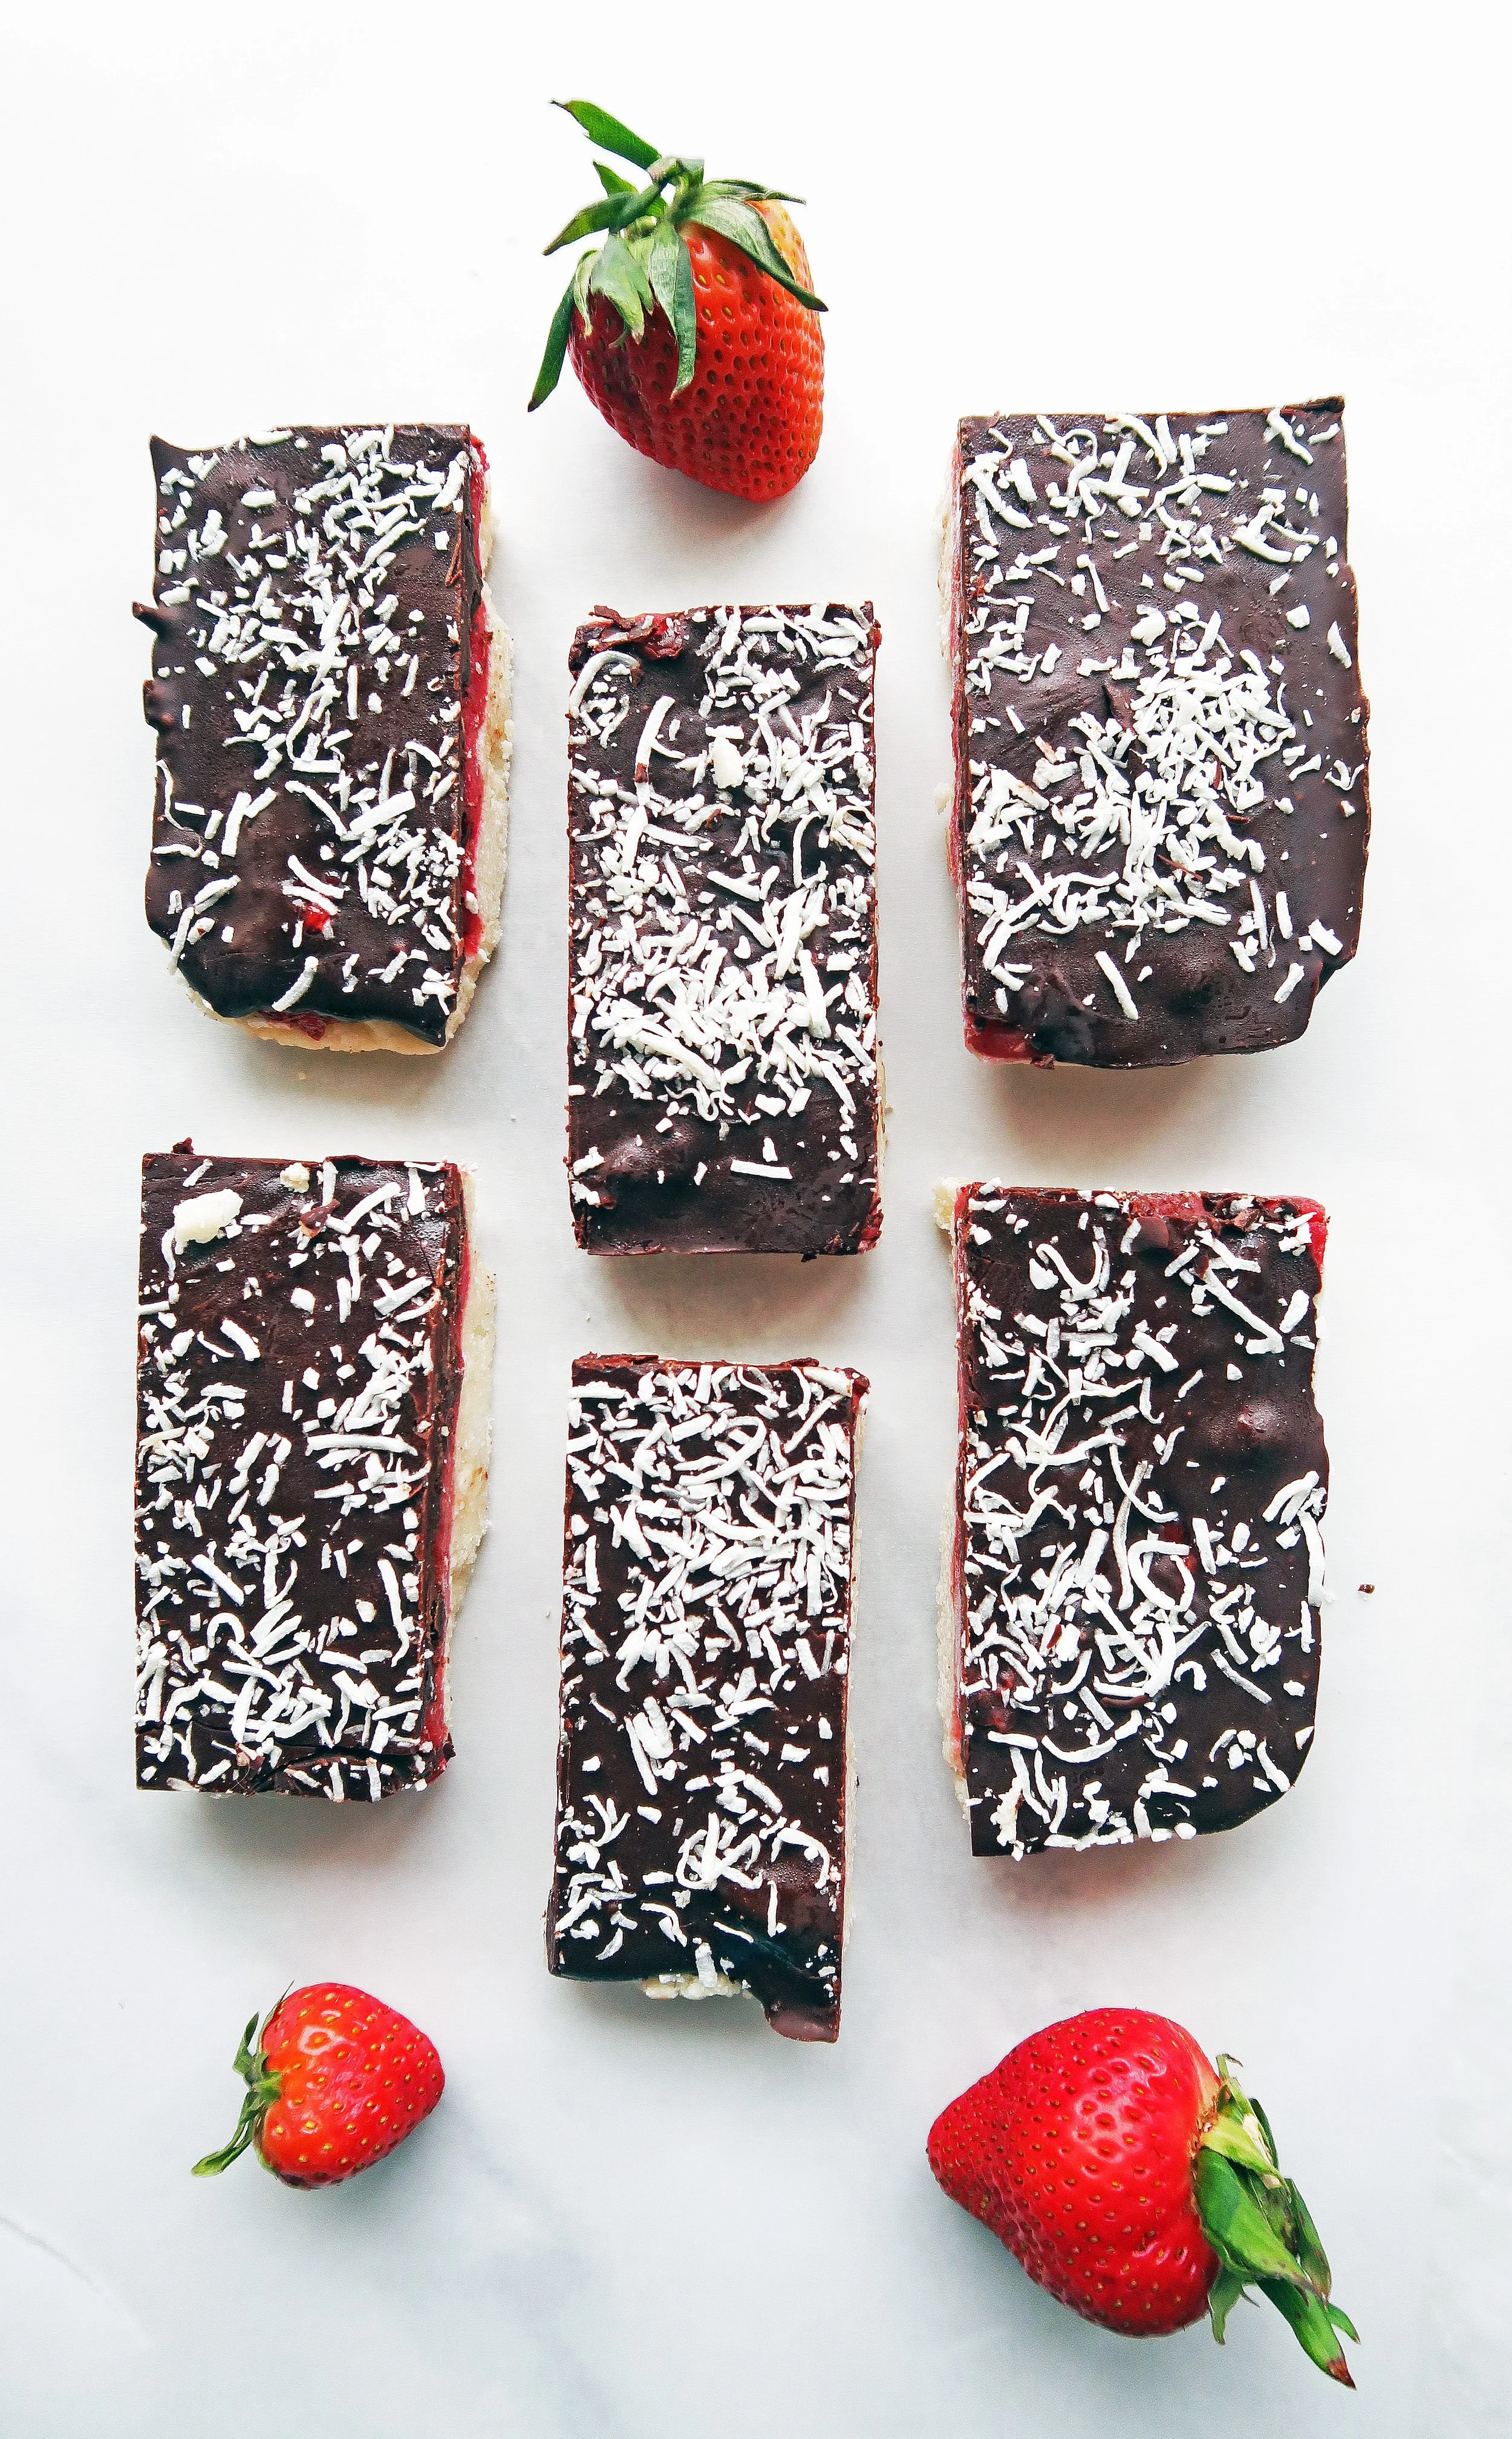 No-Bake, vegan, and gluten-free Chocolate Strawberry Coconut Bars on parchment paper with strawberries around them.  